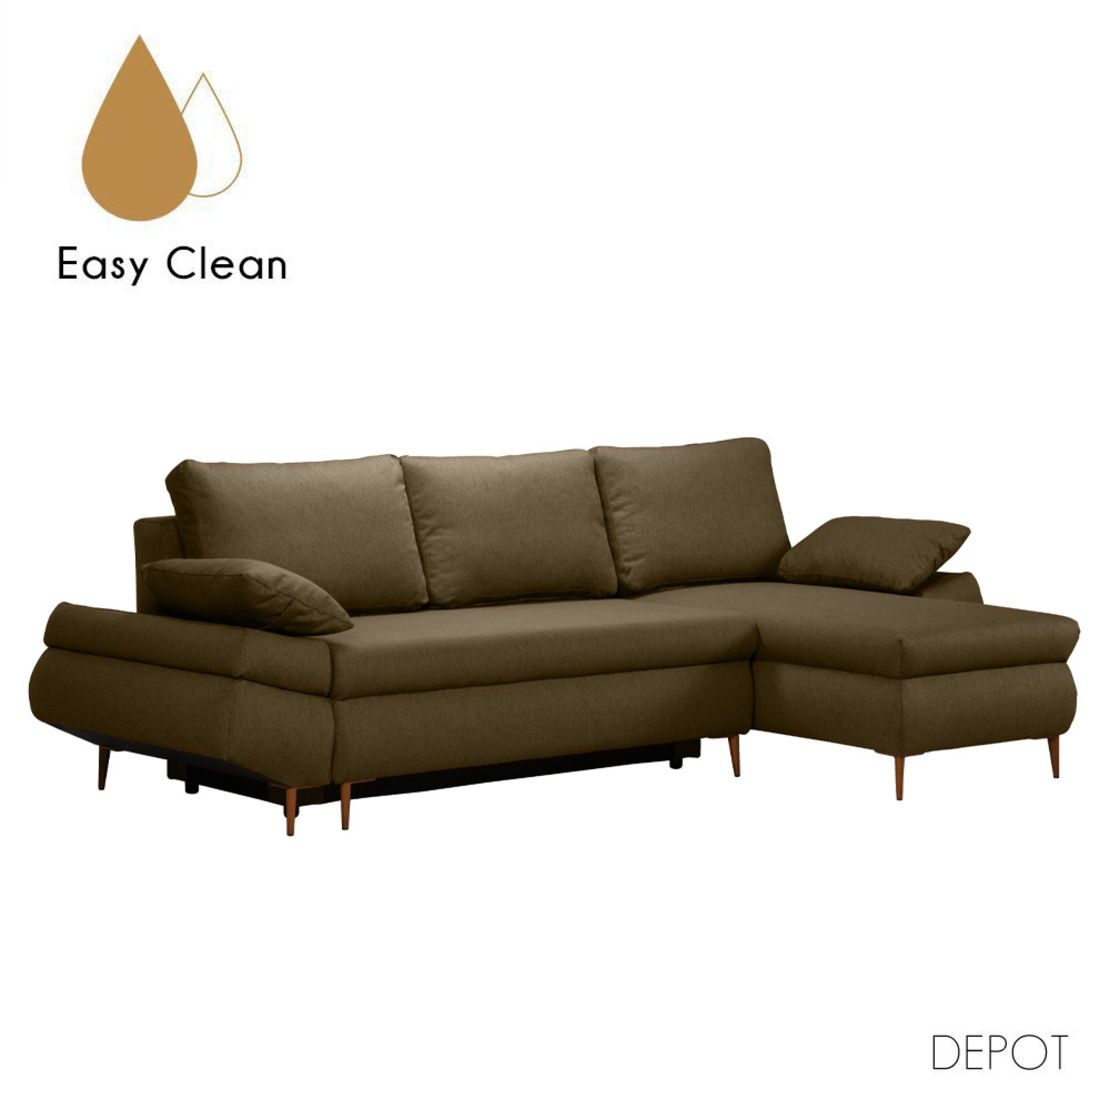 JACOB SOFA BED CORNER RIGHT EASY CLEAN FABRIC BROW